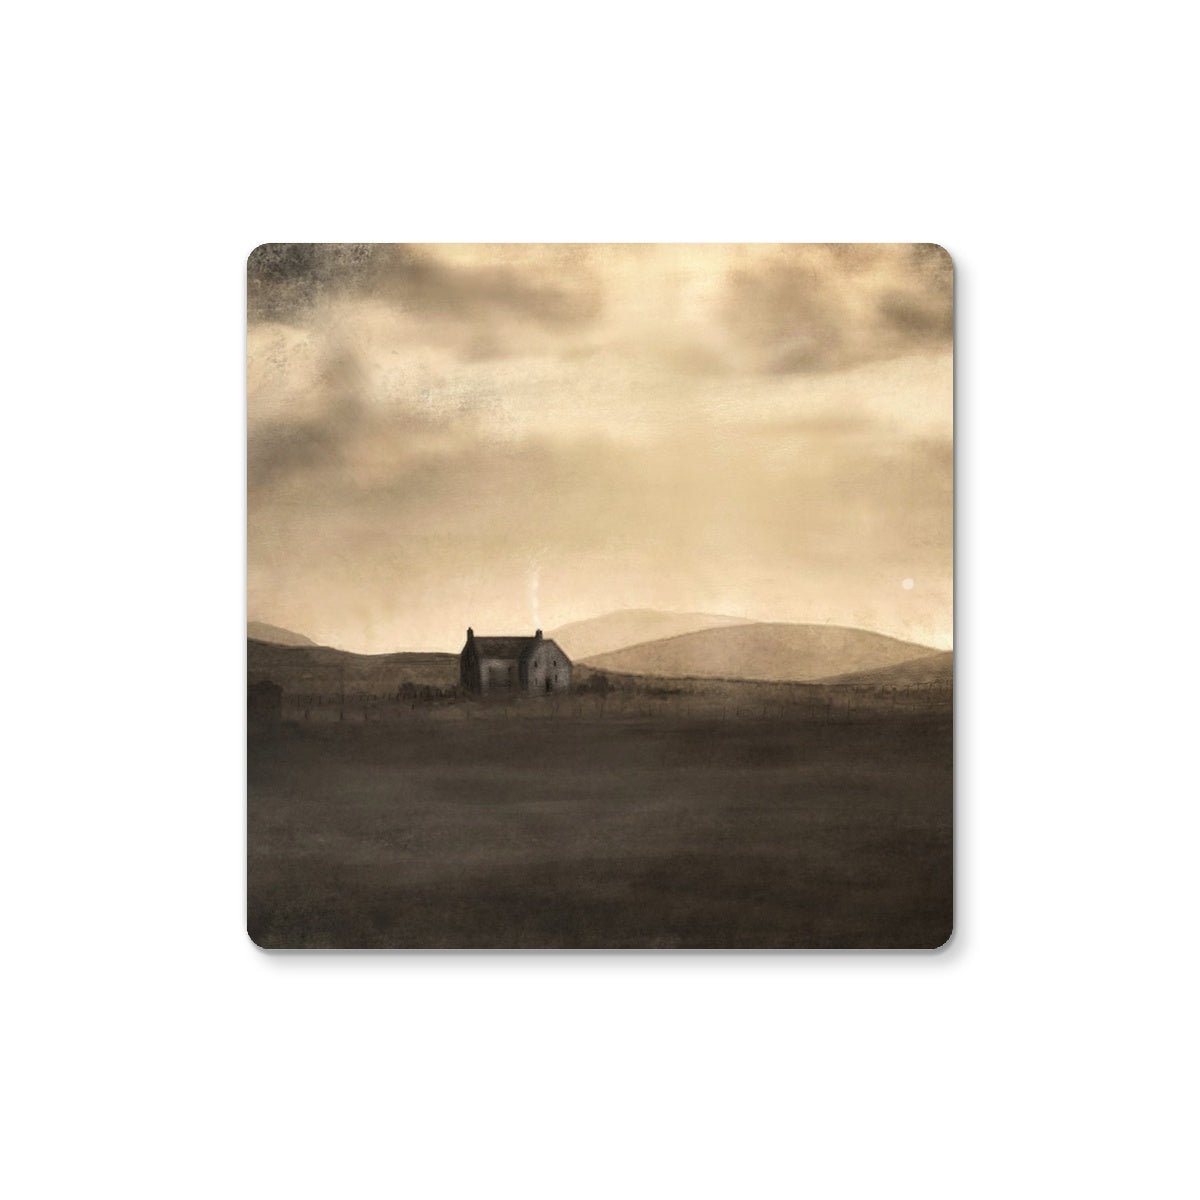 A Moonlit Croft Art Gifts Coaster-Coasters-Hebridean Islands Art Gallery-6 Coasters-Paintings, Prints, Homeware, Art Gifts From Scotland By Scottish Artist Kevin Hunter